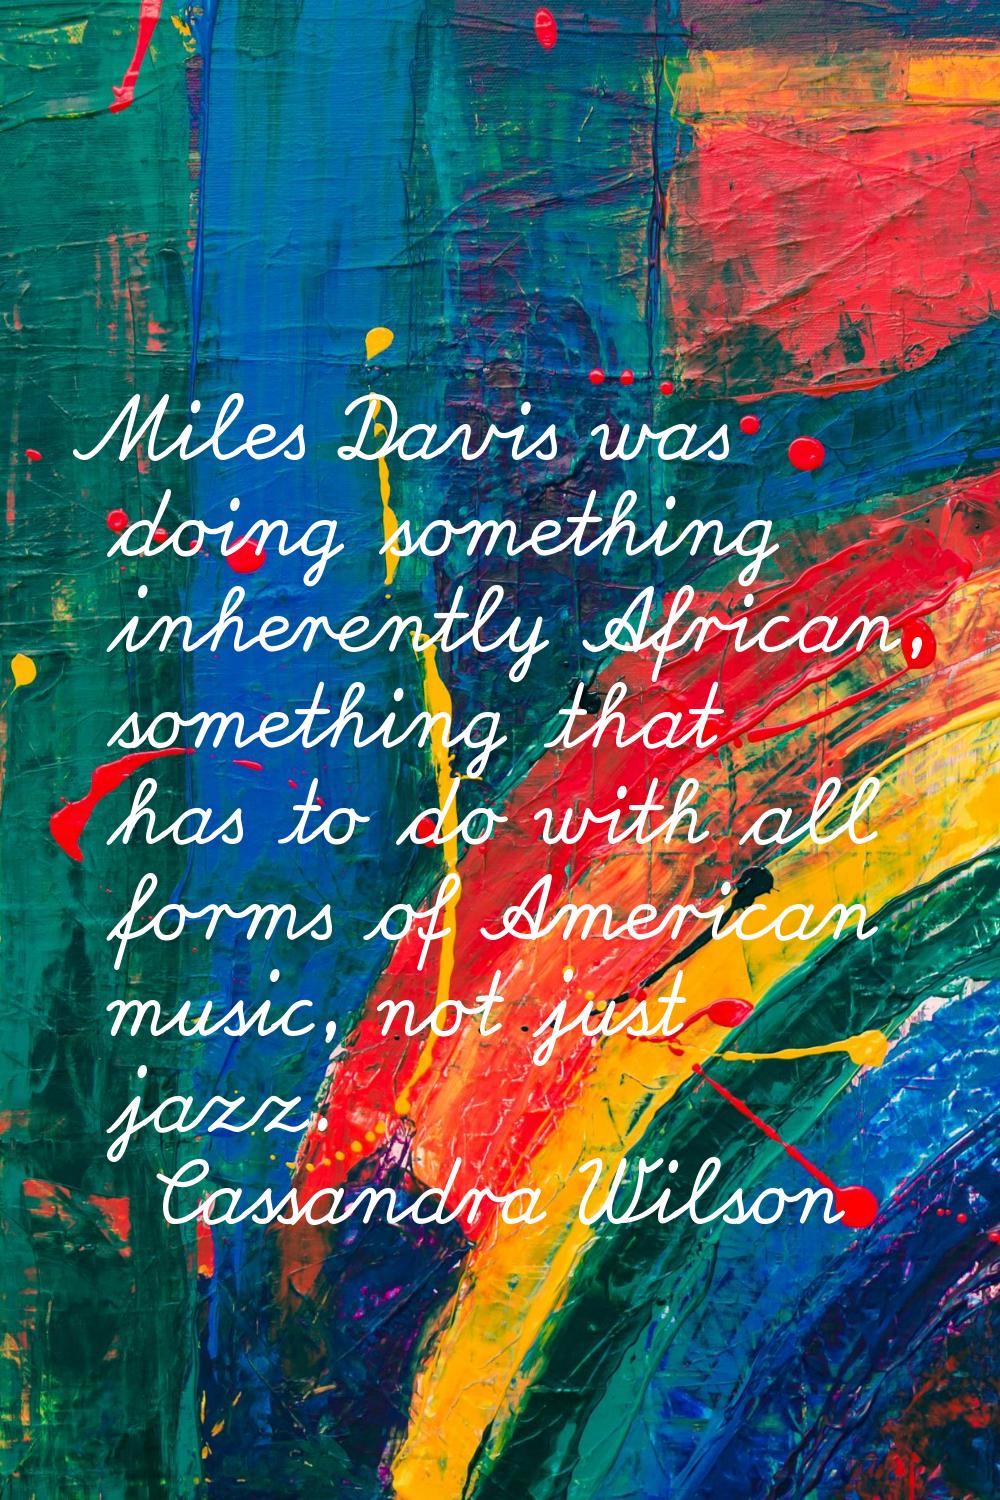 Miles Davis was doing something inherently African, something that has to do with all forms of Amer